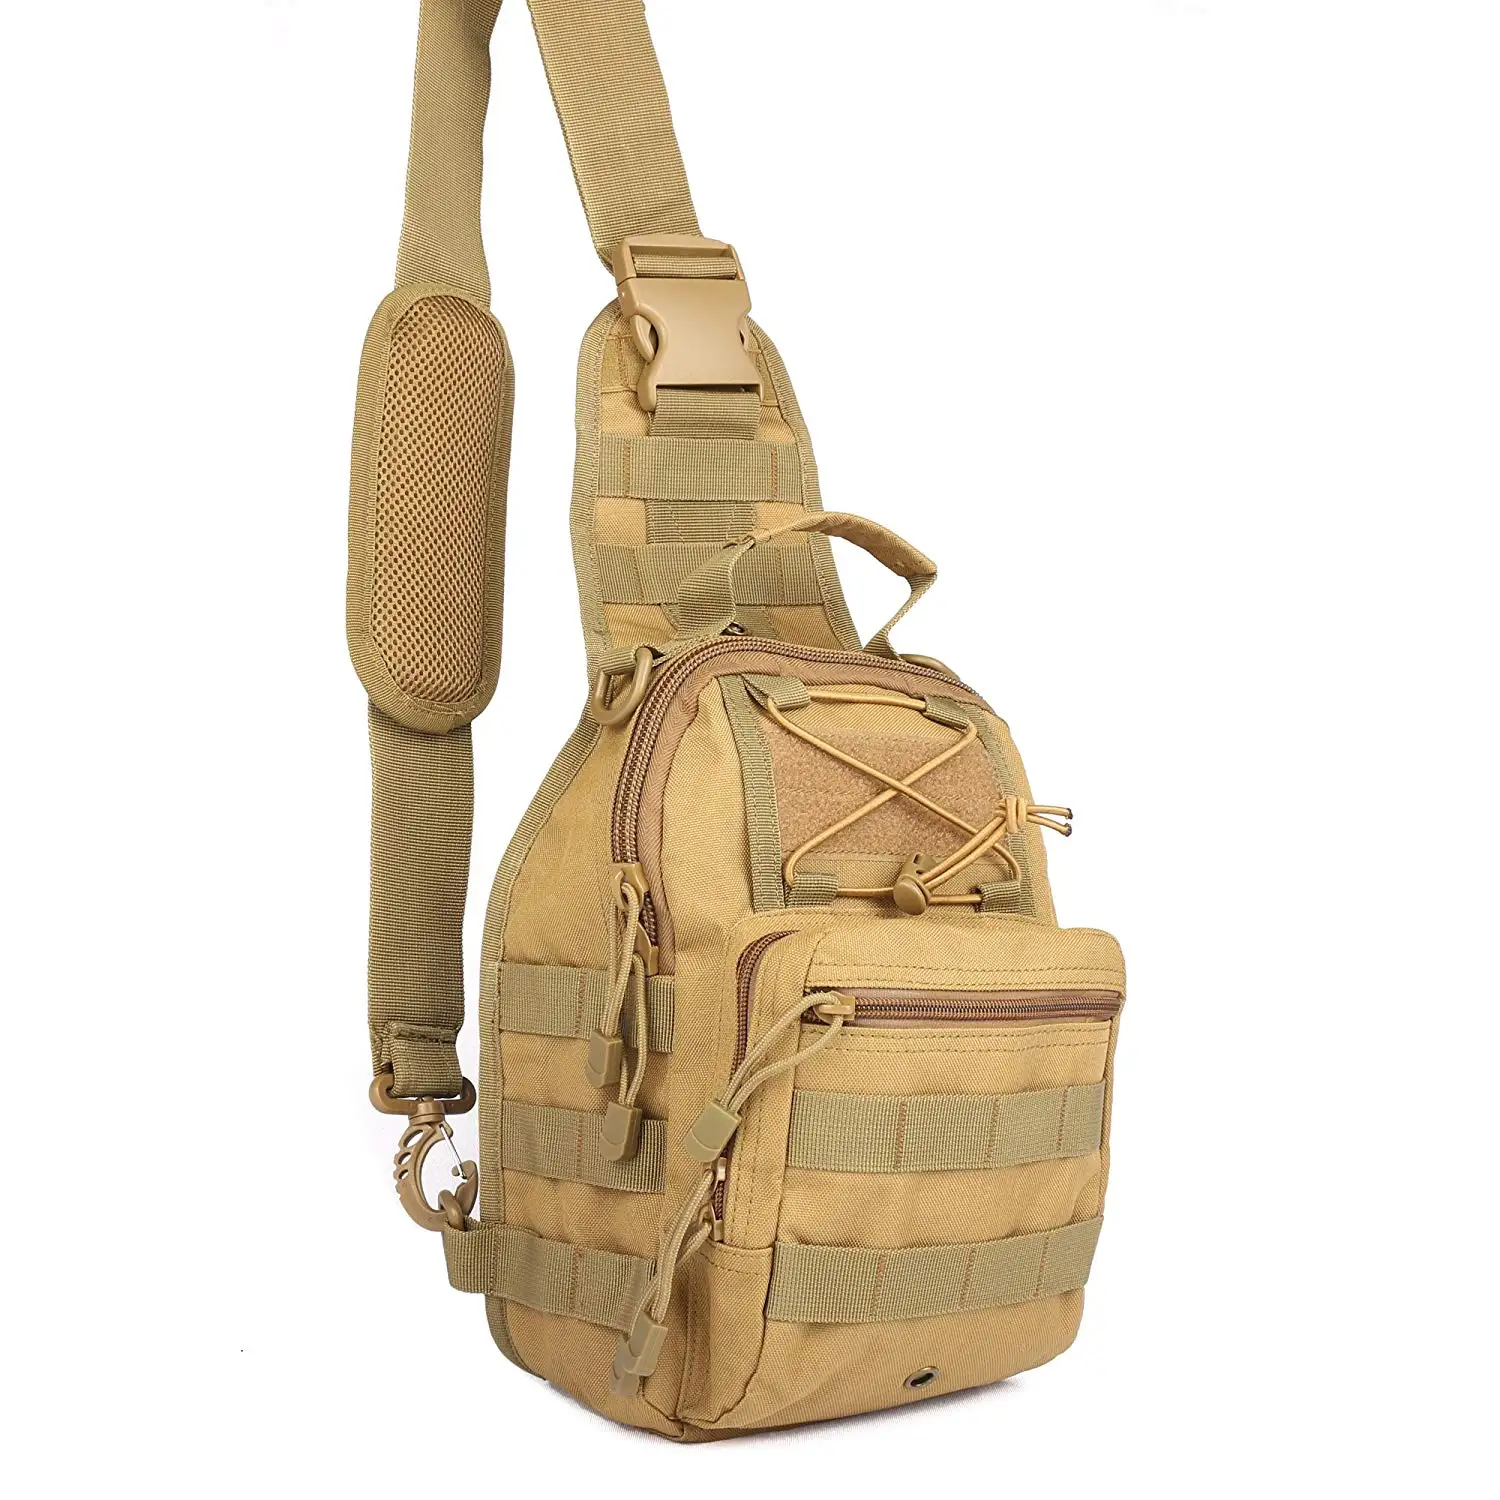 Cheap Molle Tactical Sling Bag, find Molle Tactical Sling Bag deals on ...